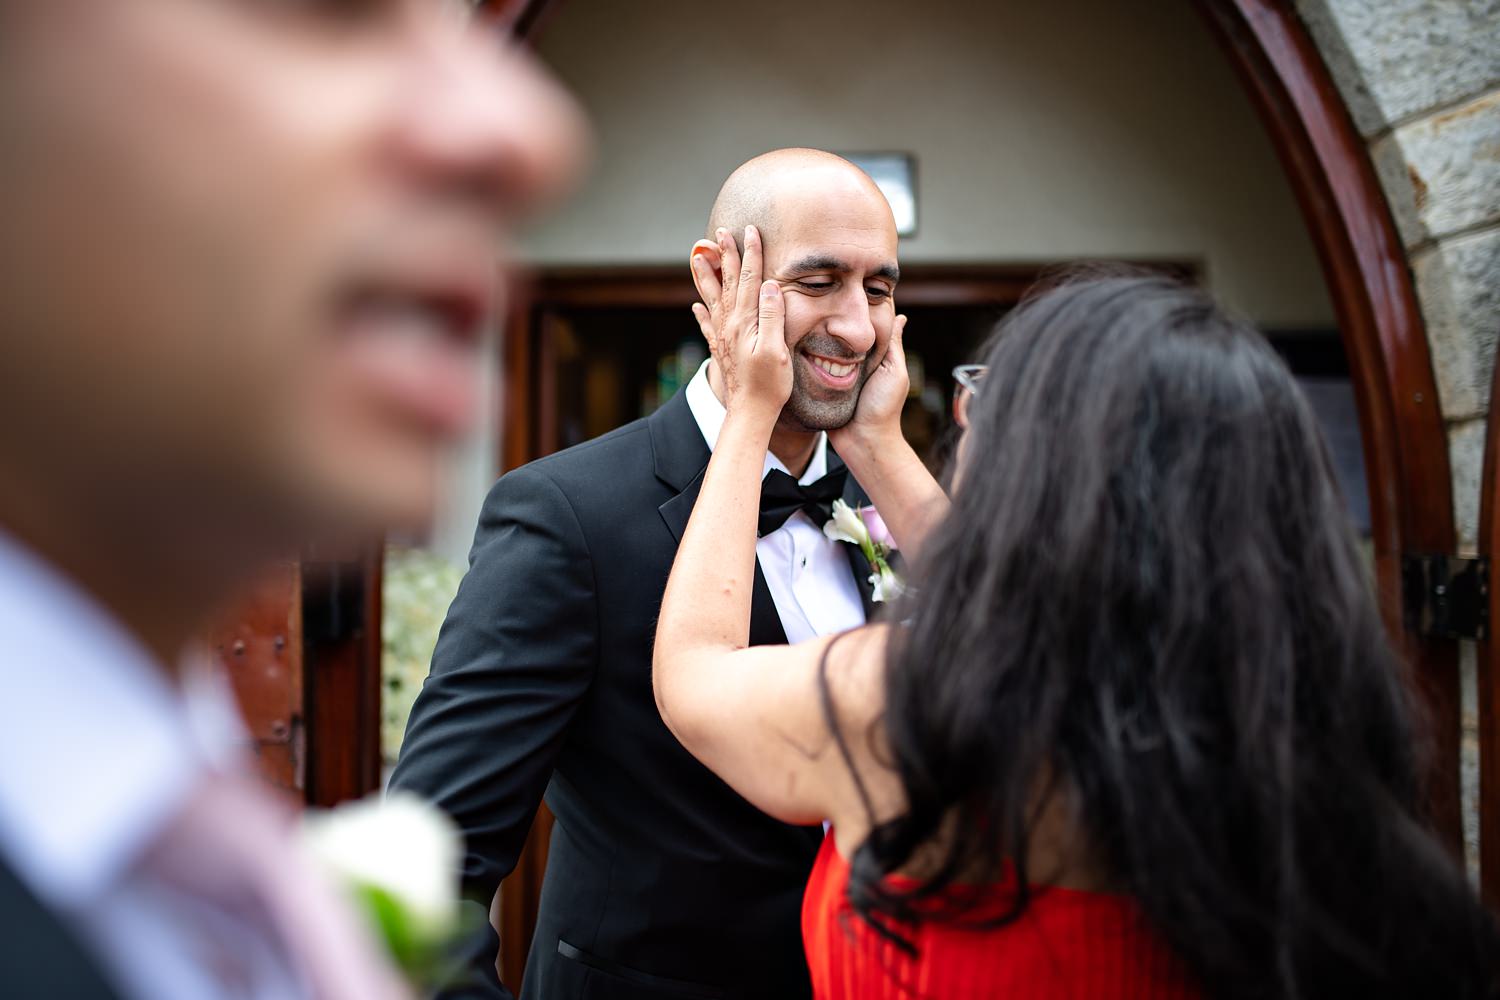 The groom's sister affectionately squeezes his face in her hands whilst congratulating him by wedding photographer in South Africa, Niki M Photography